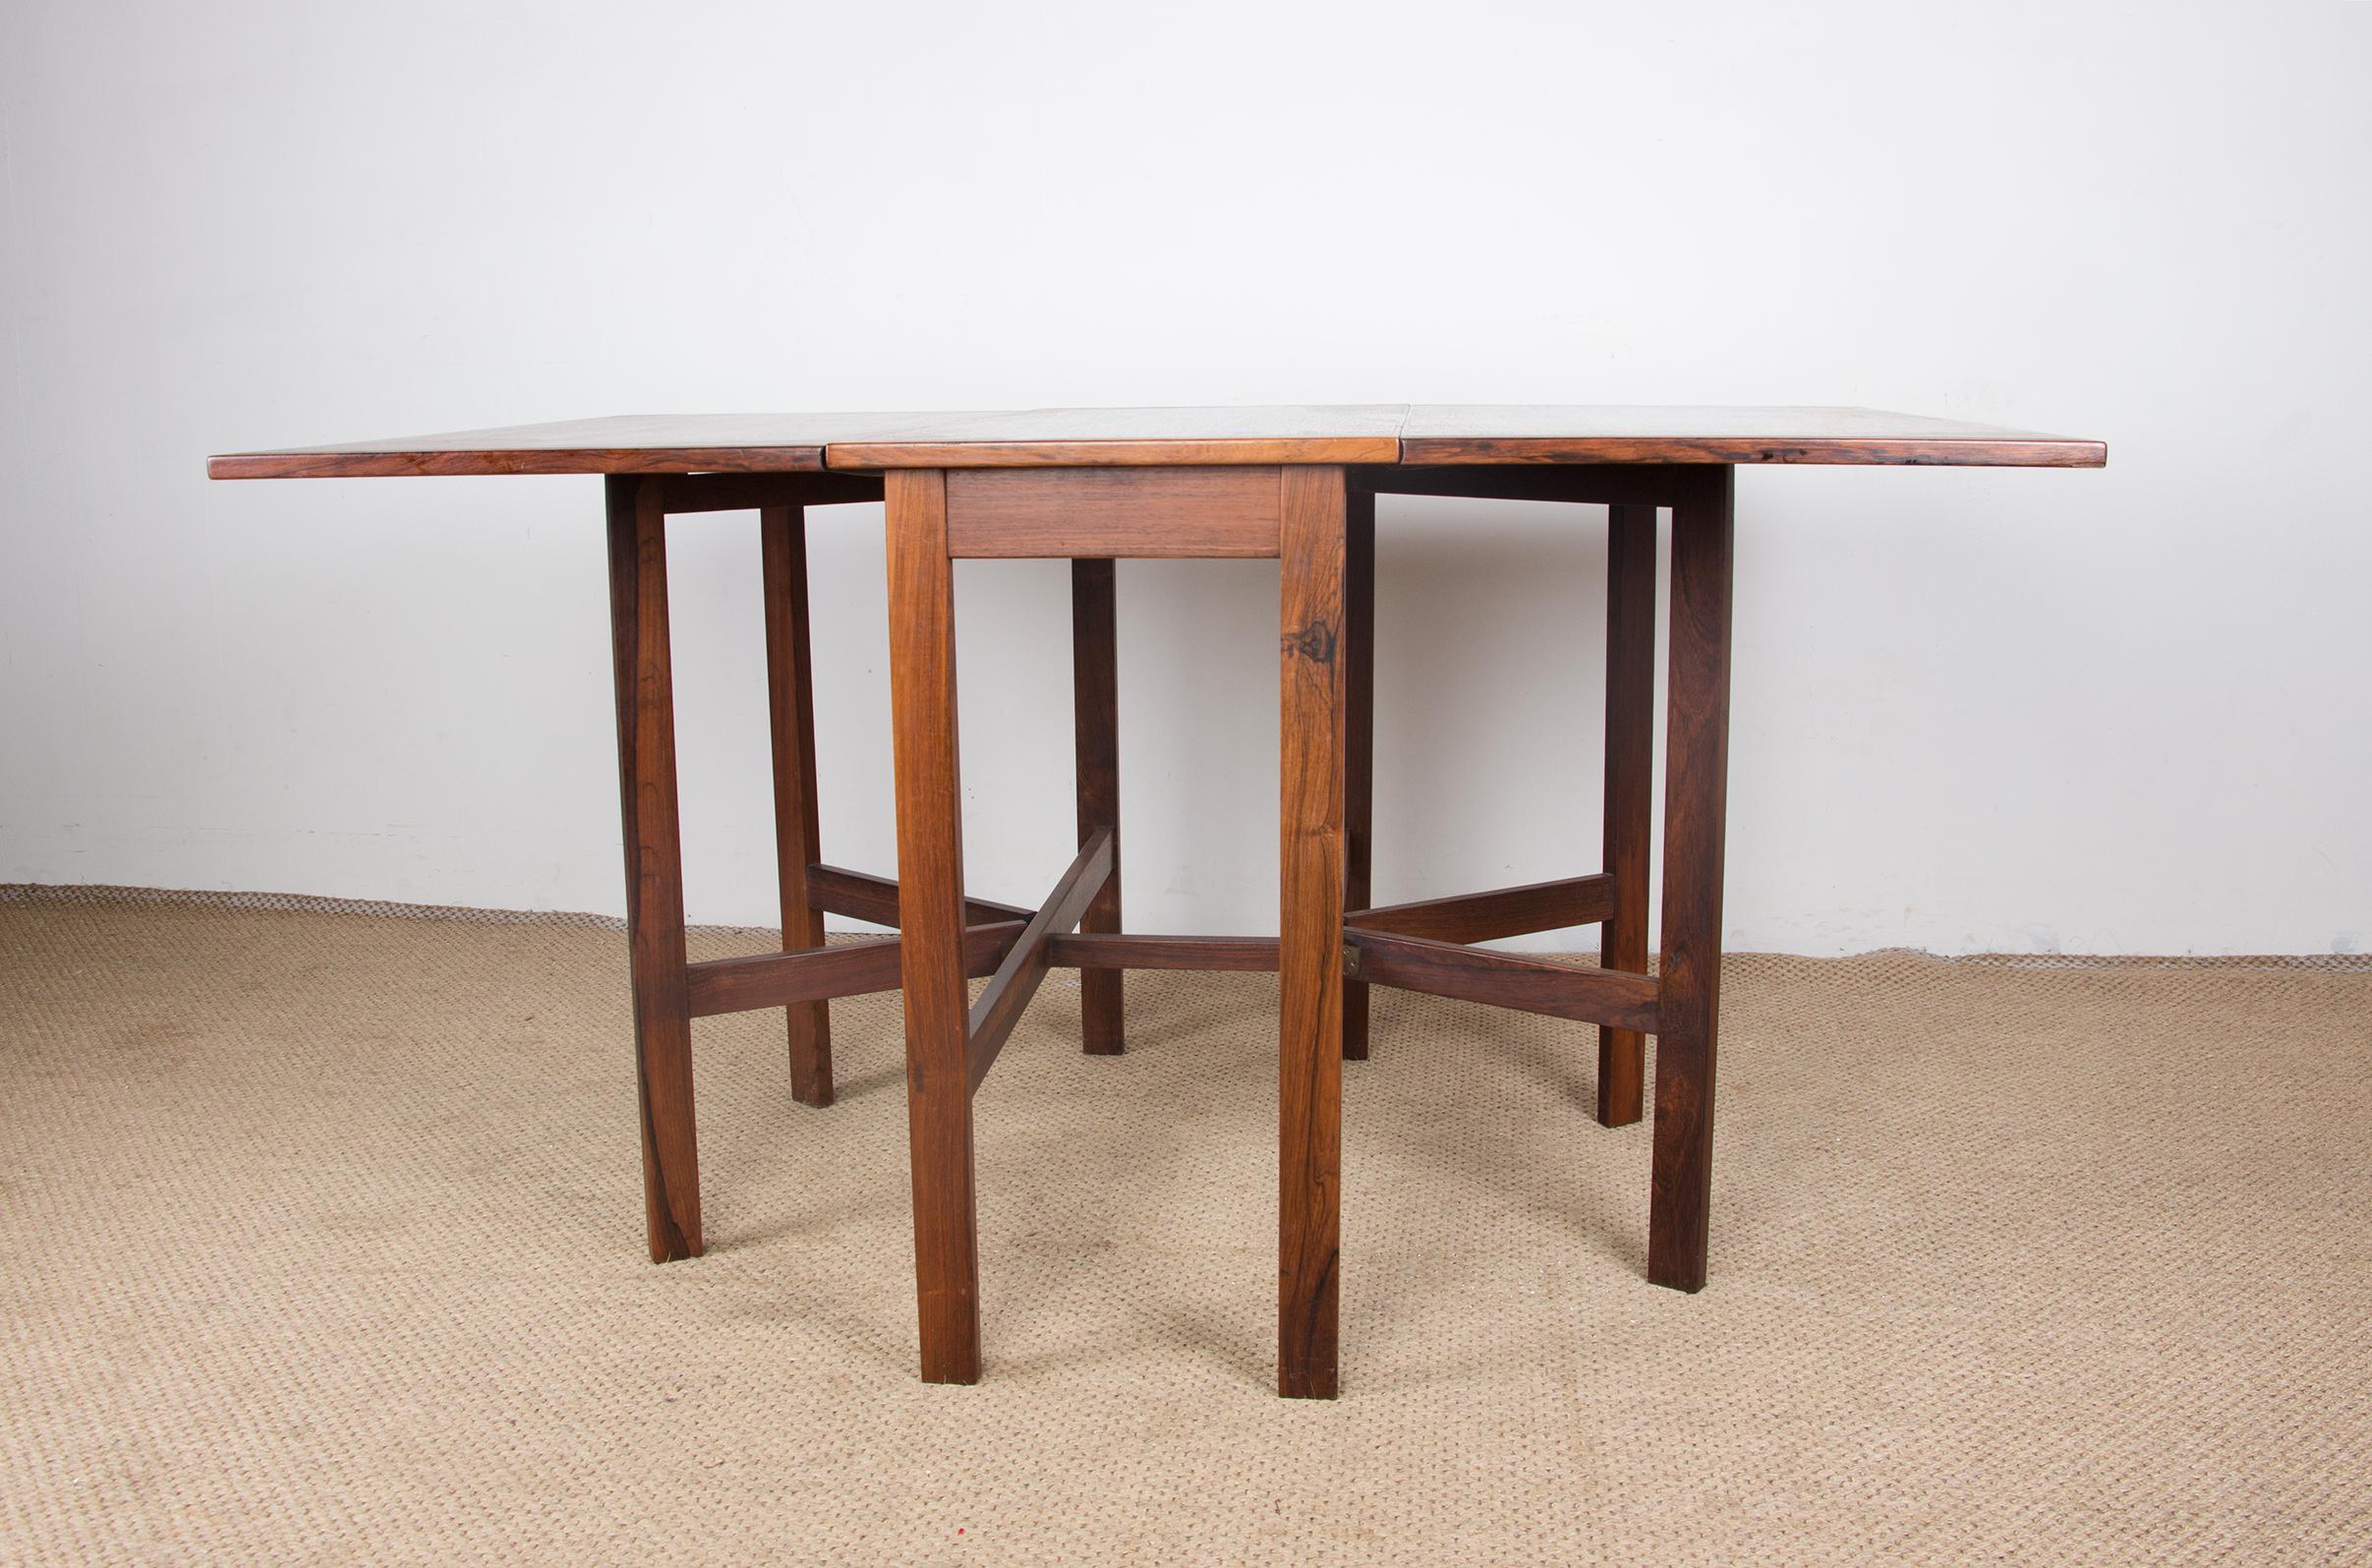 Danish Folding Table Extendable in Rosewood, with 2 Folding Extensions, 1960 For Sale 3